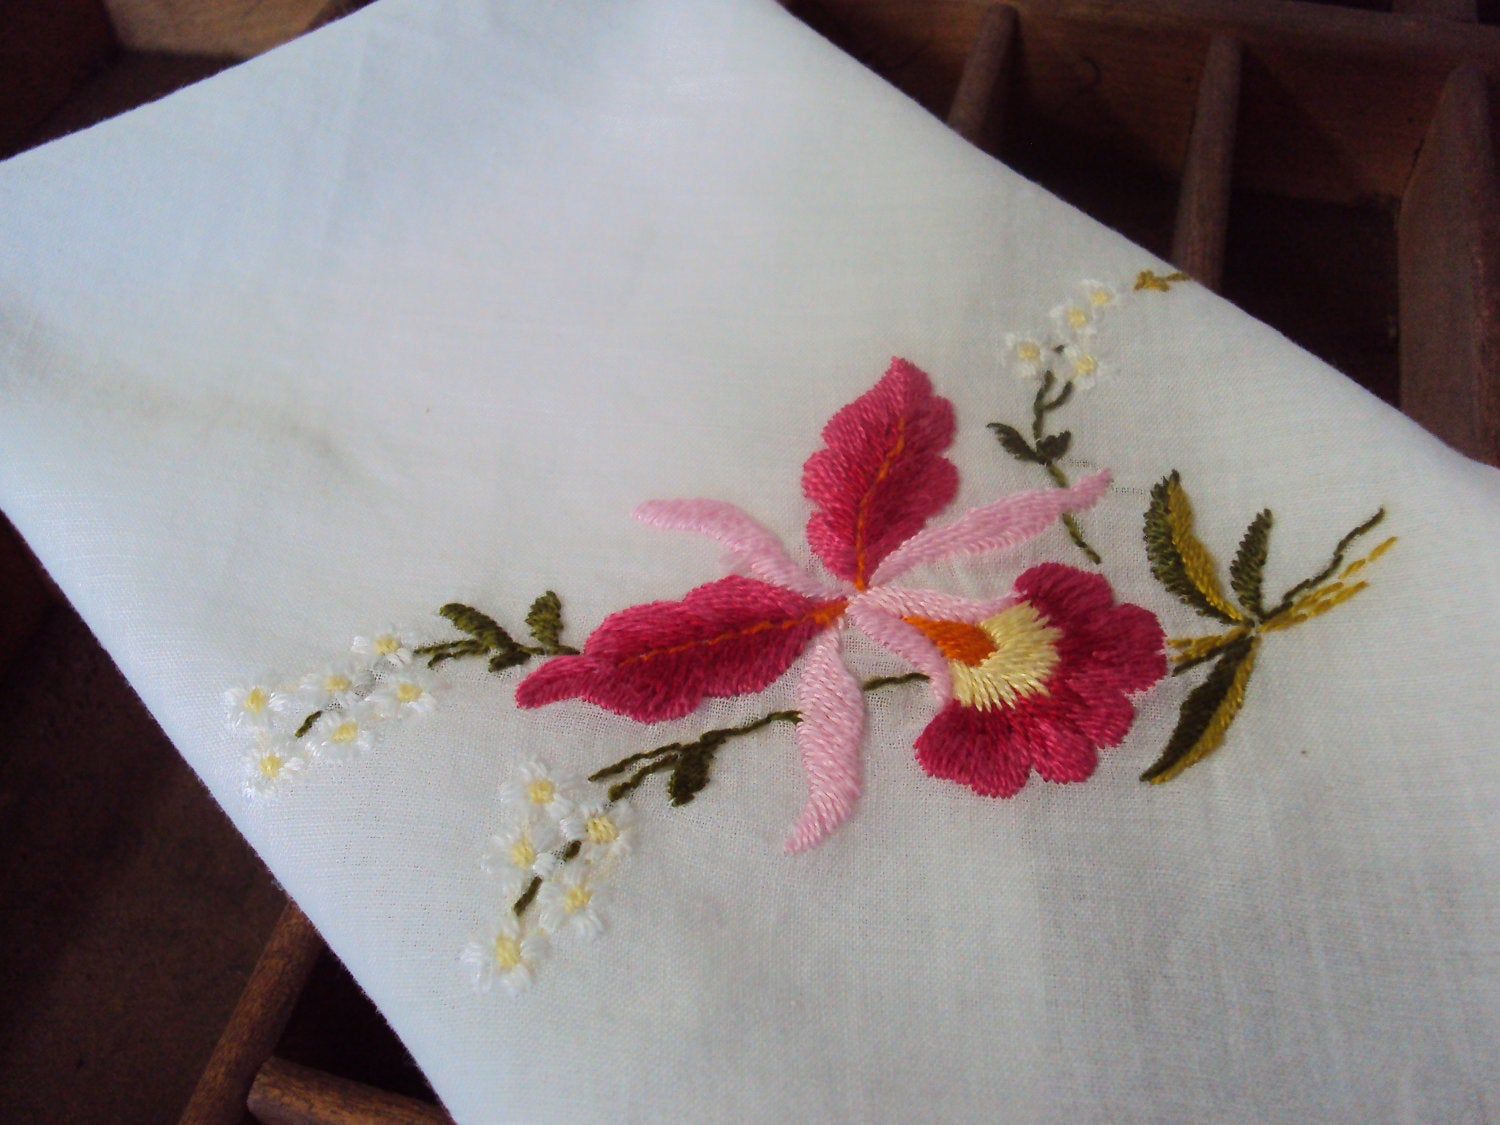 Hand Embroidery Patterns Free Vintage Handkerchief Embroidery Designs Free Embroidery Patterns